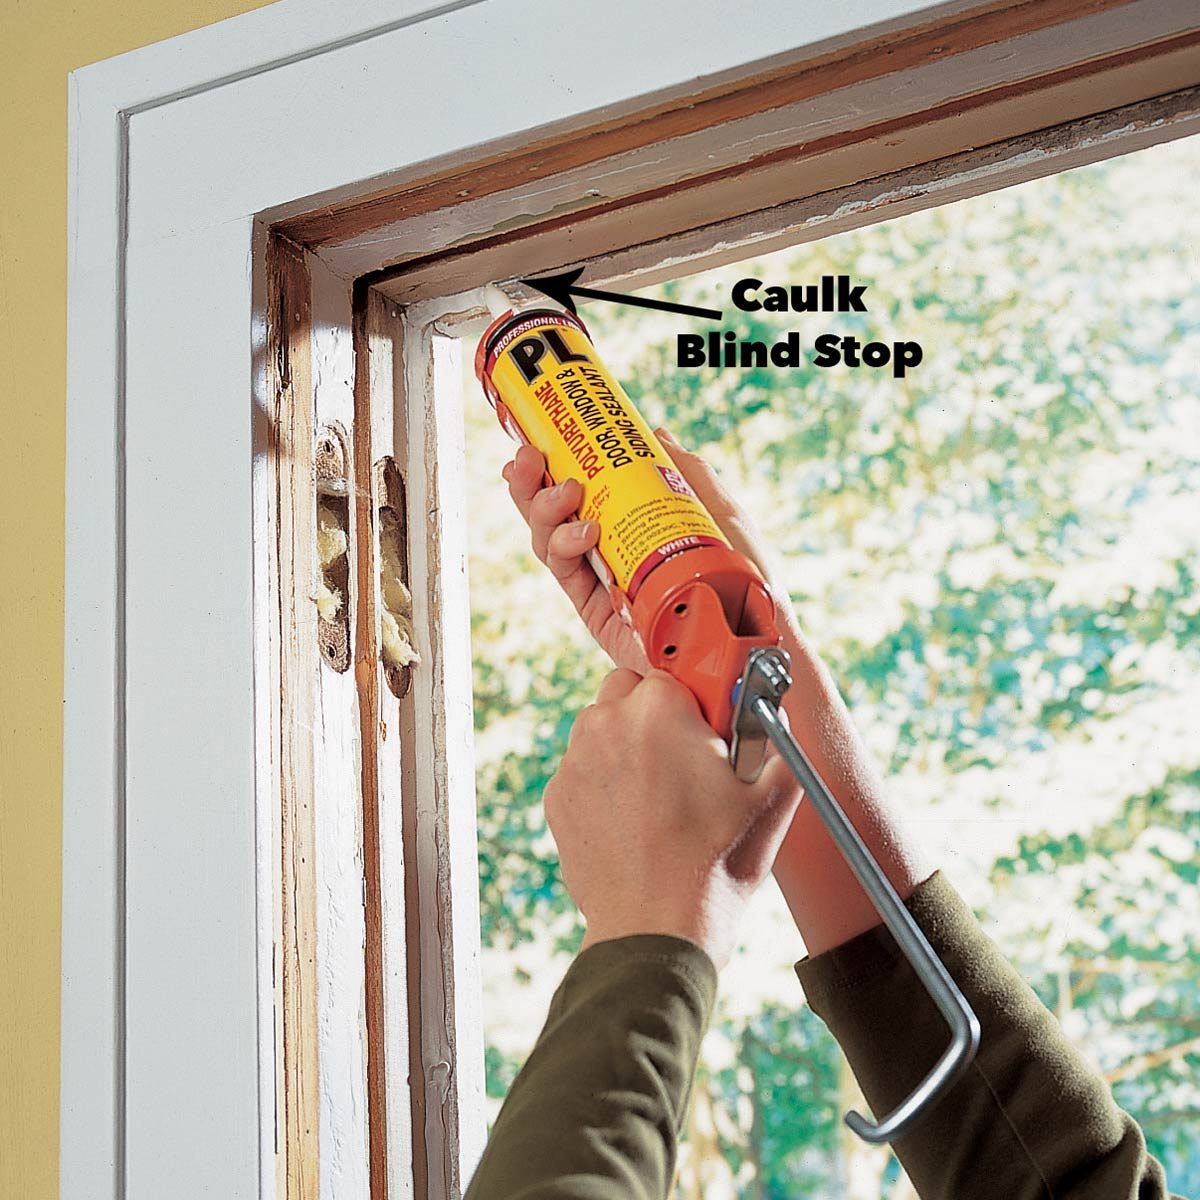 caulk window replacement replacing windows in old house